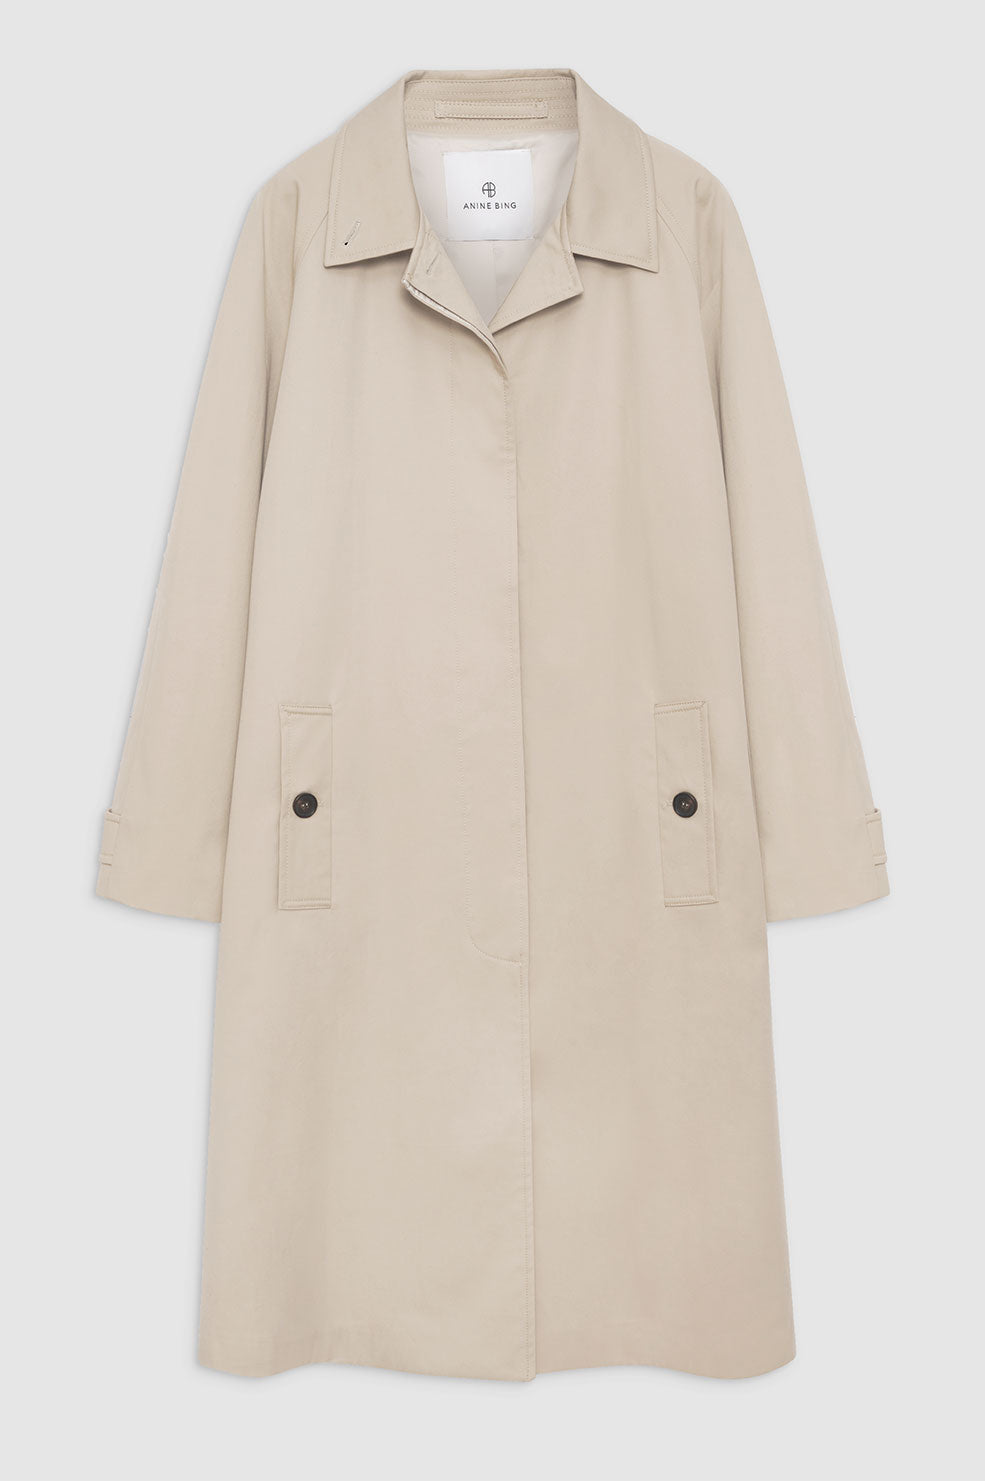 ANINE BING Randy Trench - Beige - Front View